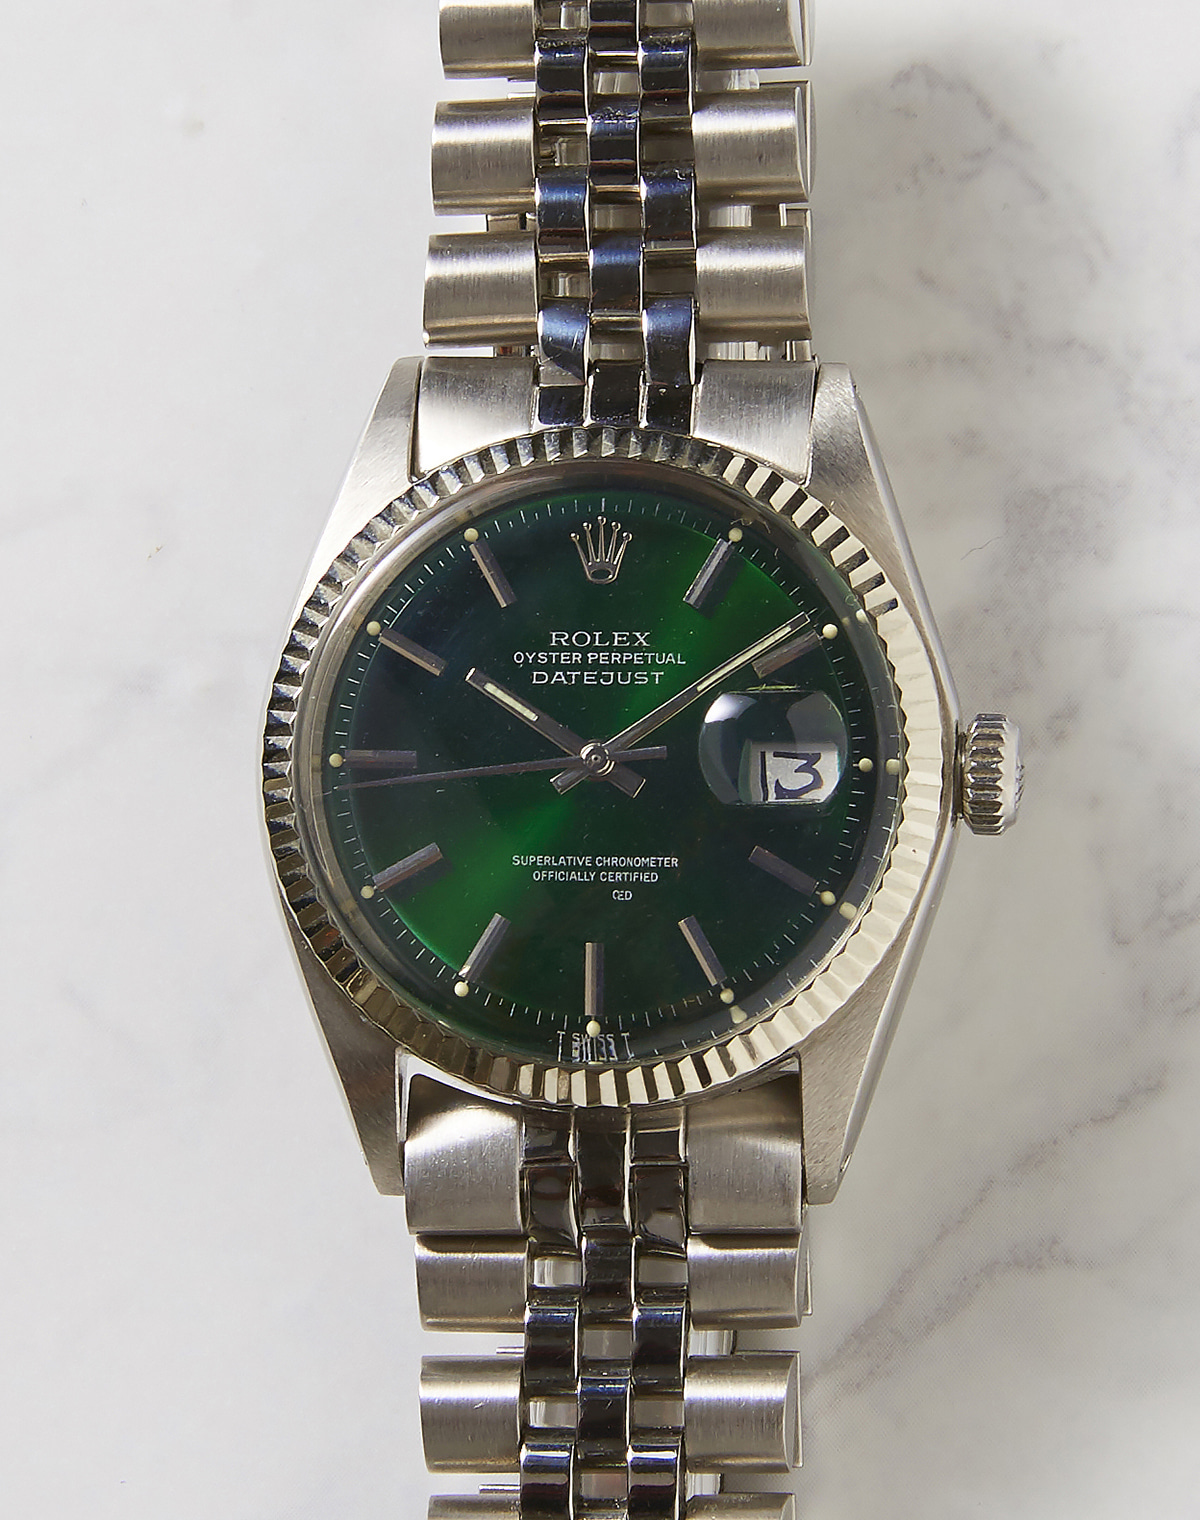 ROLEX OYSTER PERPETUAL DATEJUST 1601